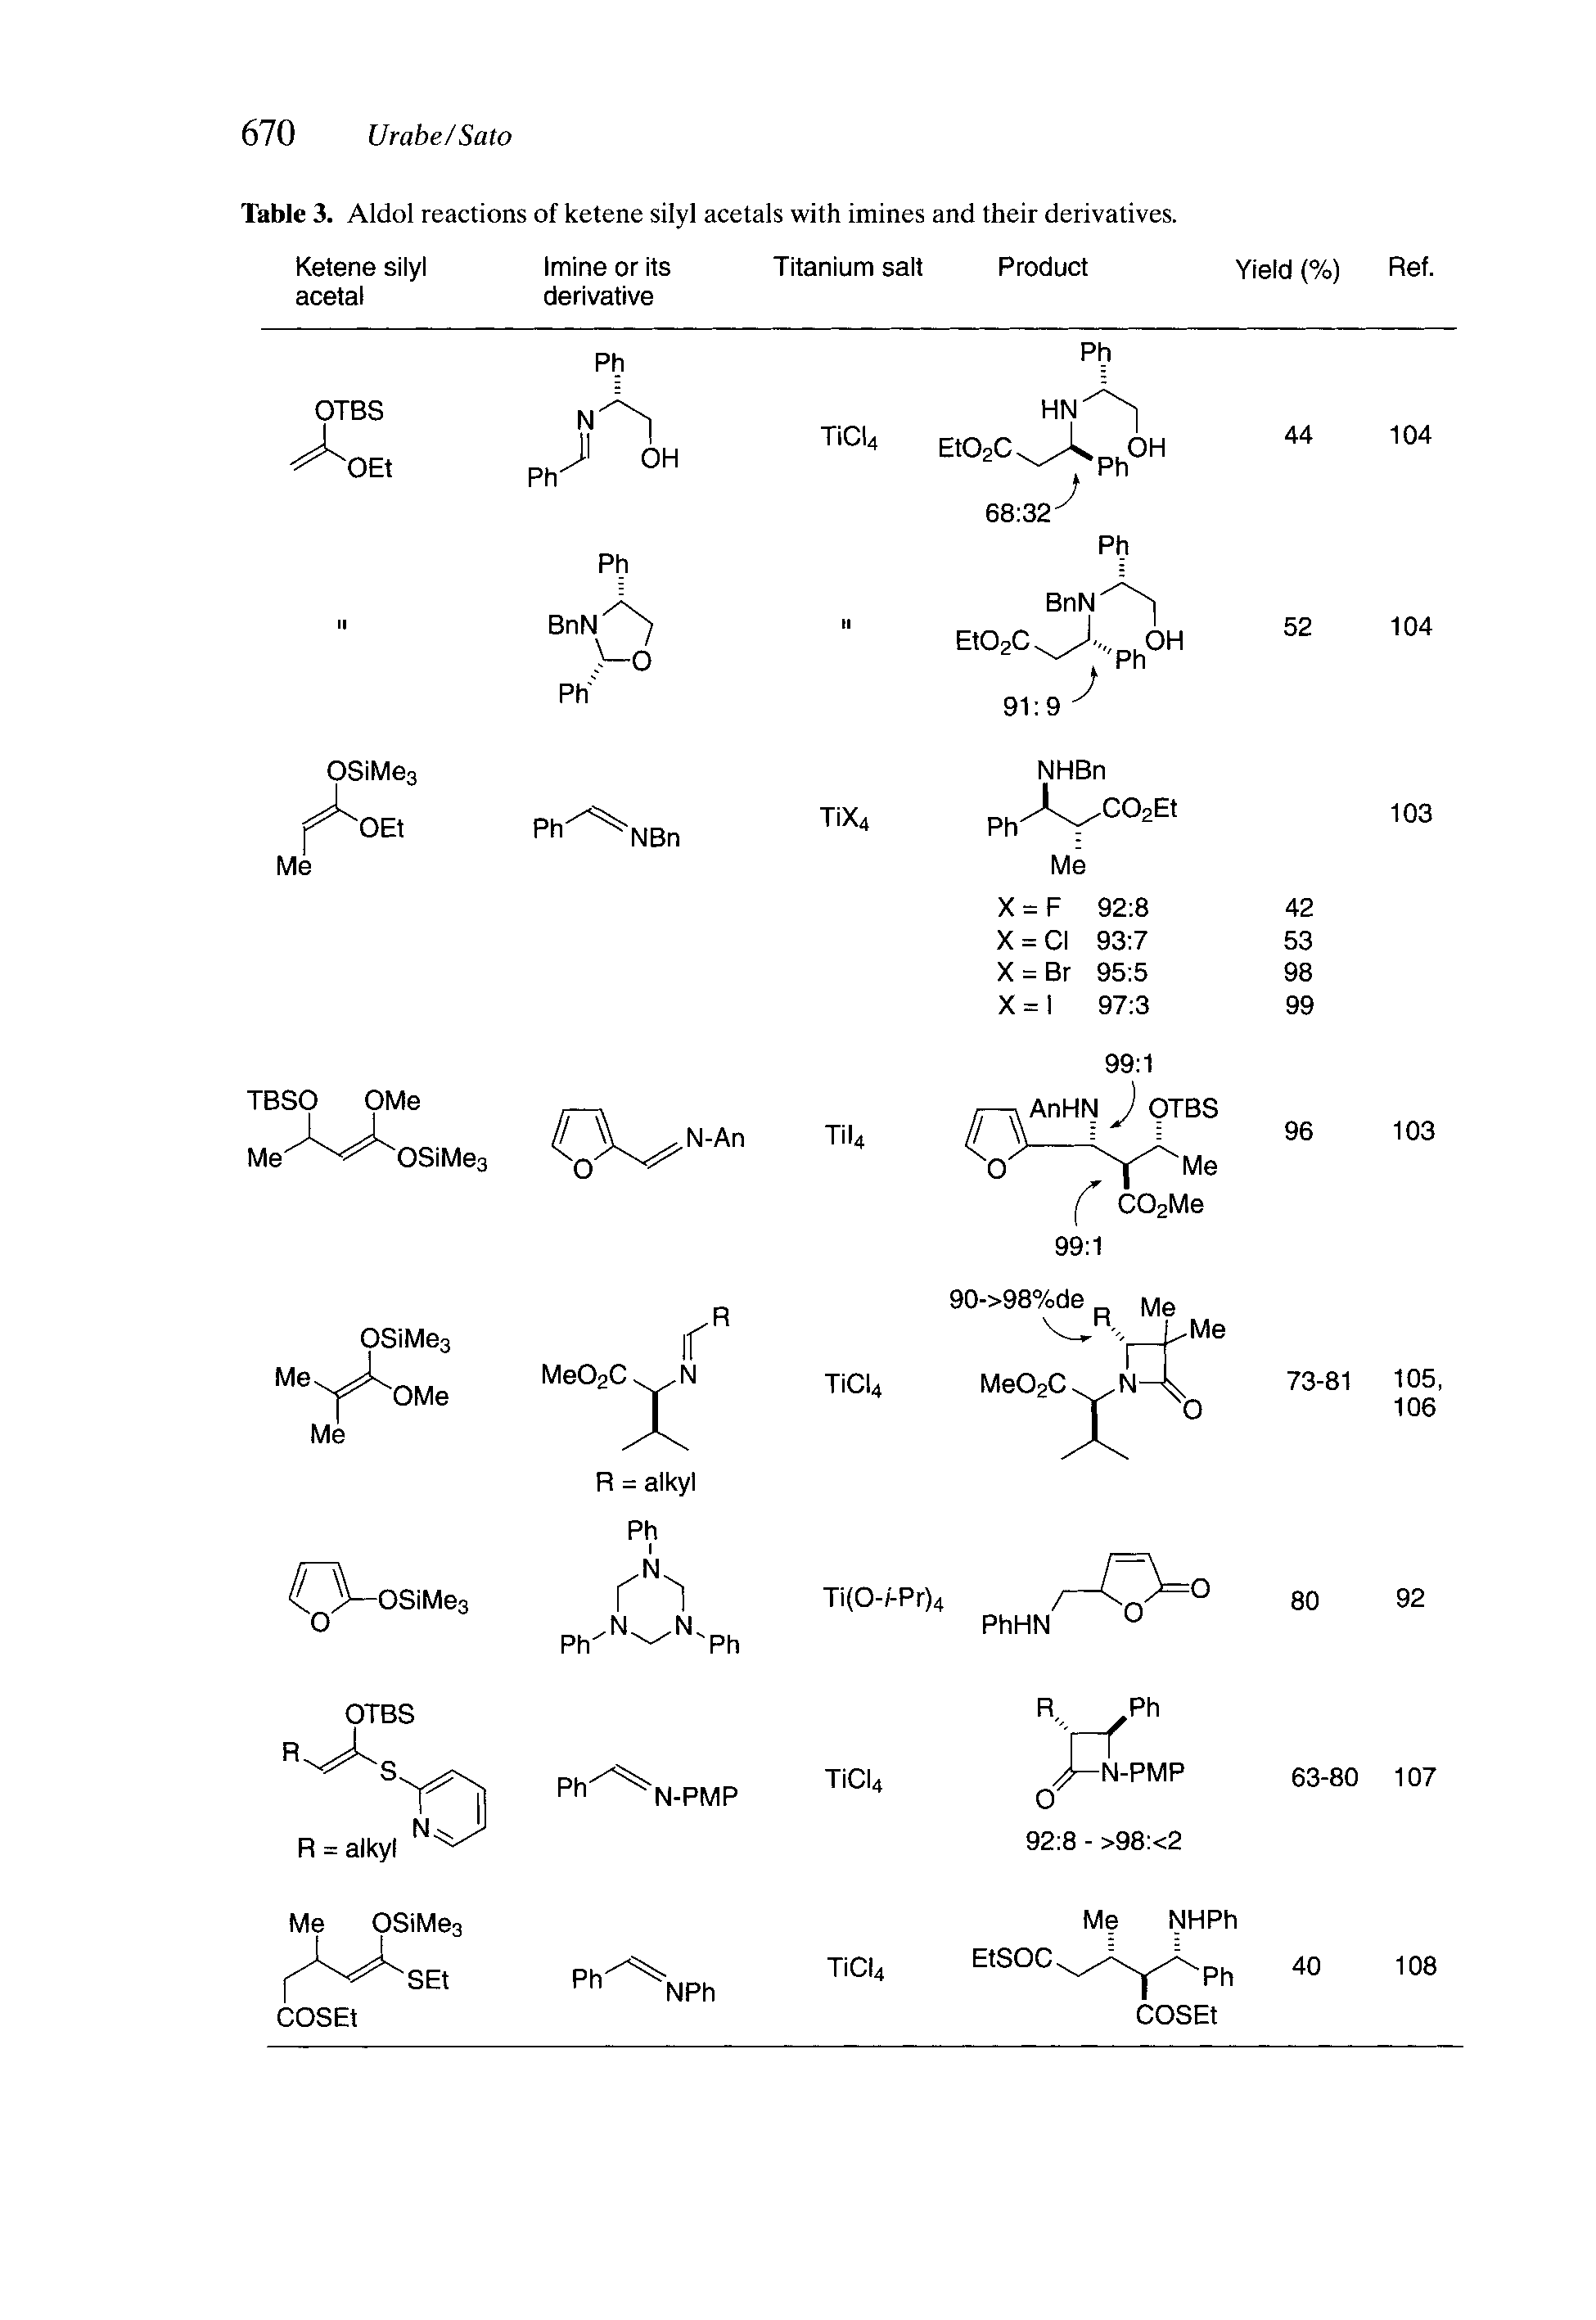 Table 3. Aldol reactions of ketene silyl acetals with imines and their derivatives.